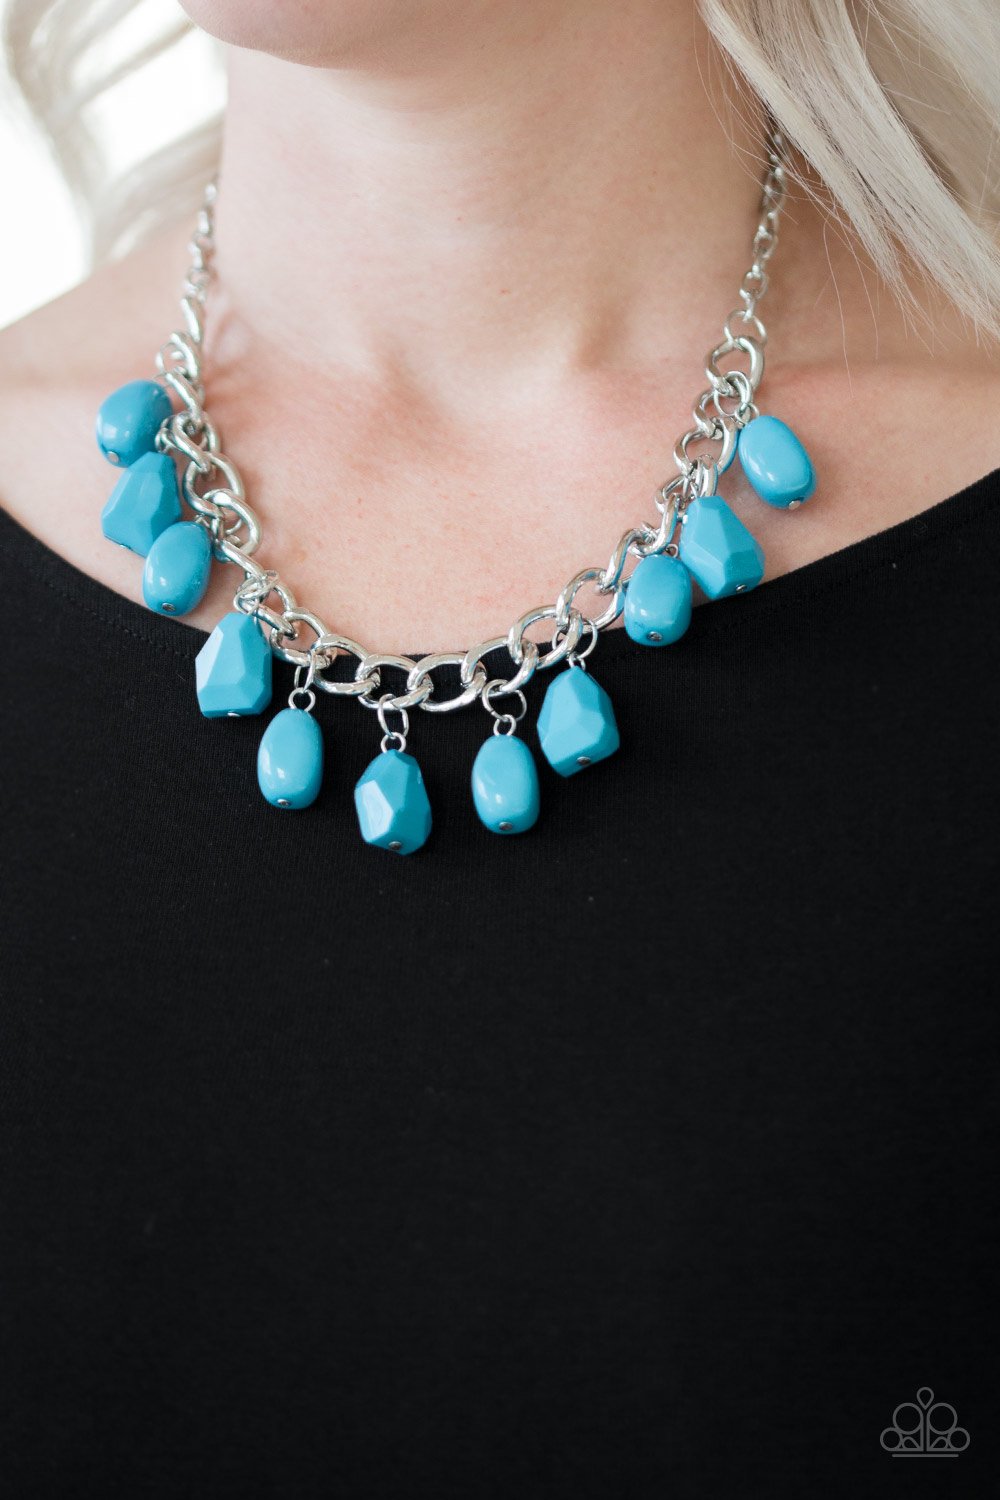 Take The COLOR Wheel! - Blue and Silver Necklace - Paparazzi Accessories - A collection of round and faceted blue beads swings from the bottom of a bulky silver chain below the collar, creating a vivacious fringe fashion necklace.